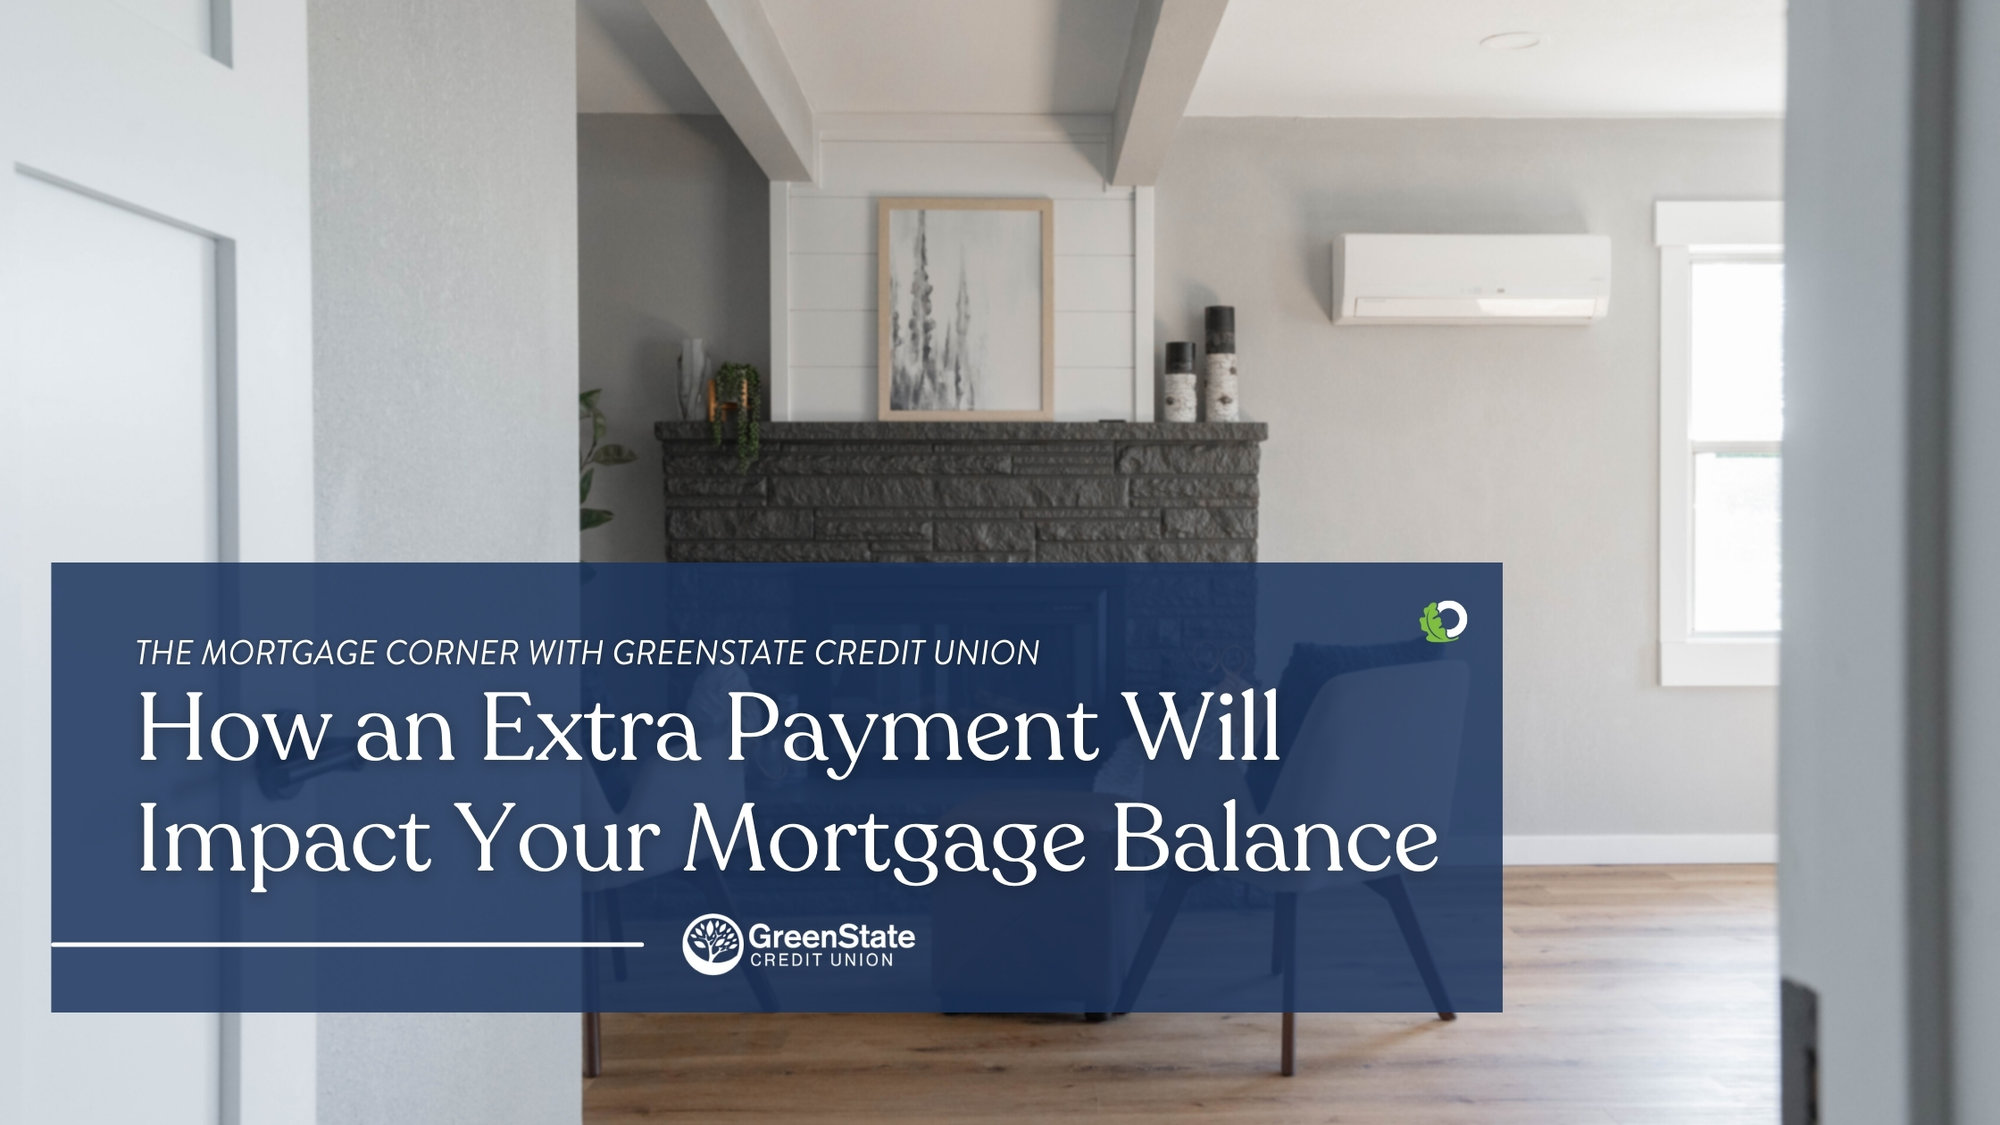 the mortgage corner with greenstate credit union - how an extra payment will impact your mortgage balance